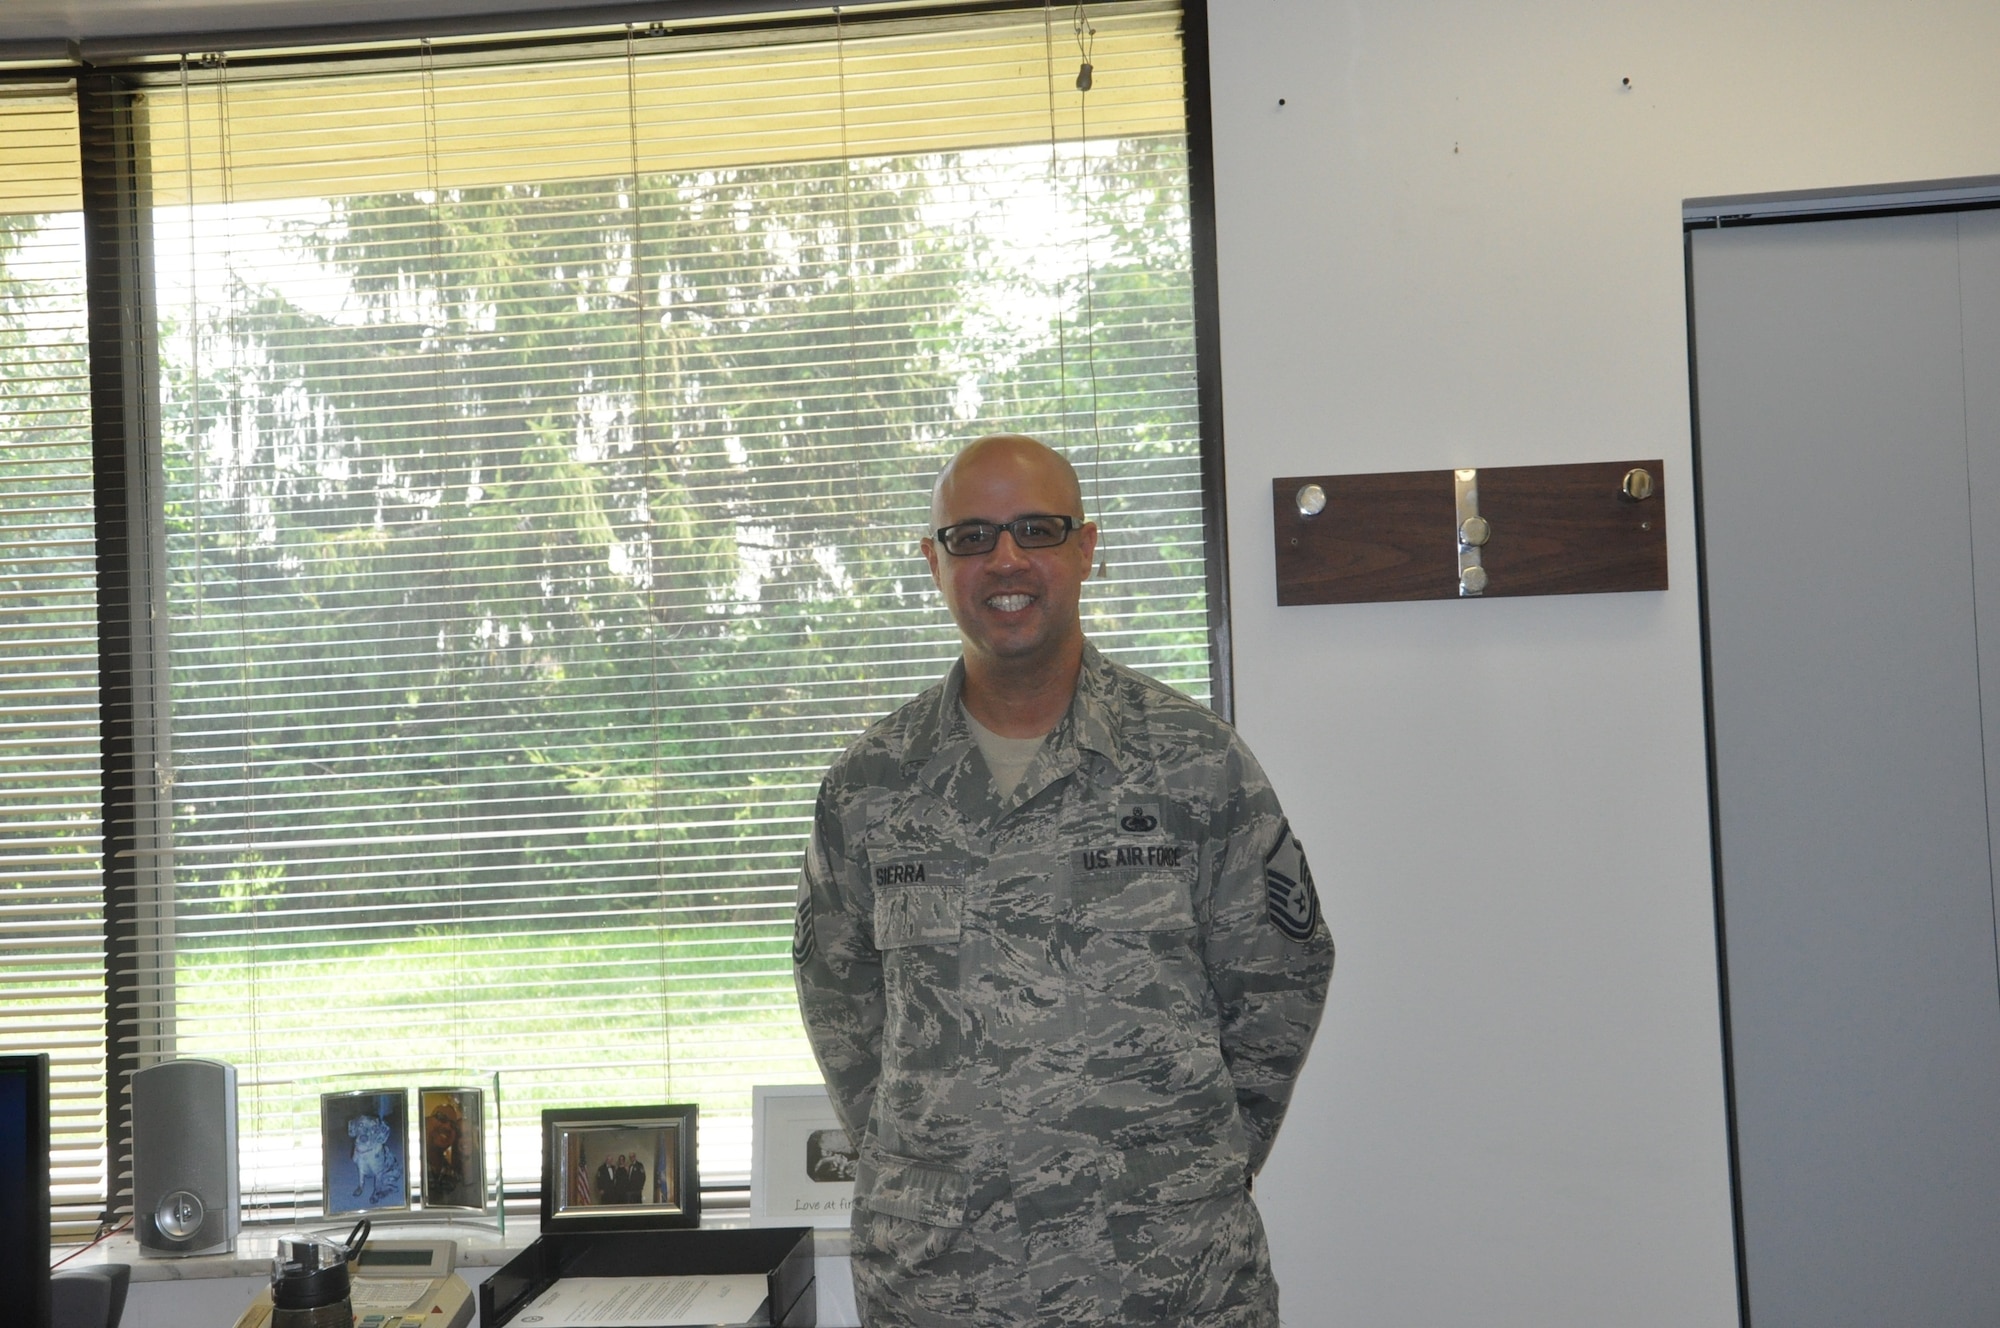 Master Sgt. Michael Sierra, commandant of the Airman Leadership School at Wright-Patterson Air Force Base. (Air Force photo by Sandy Simison)